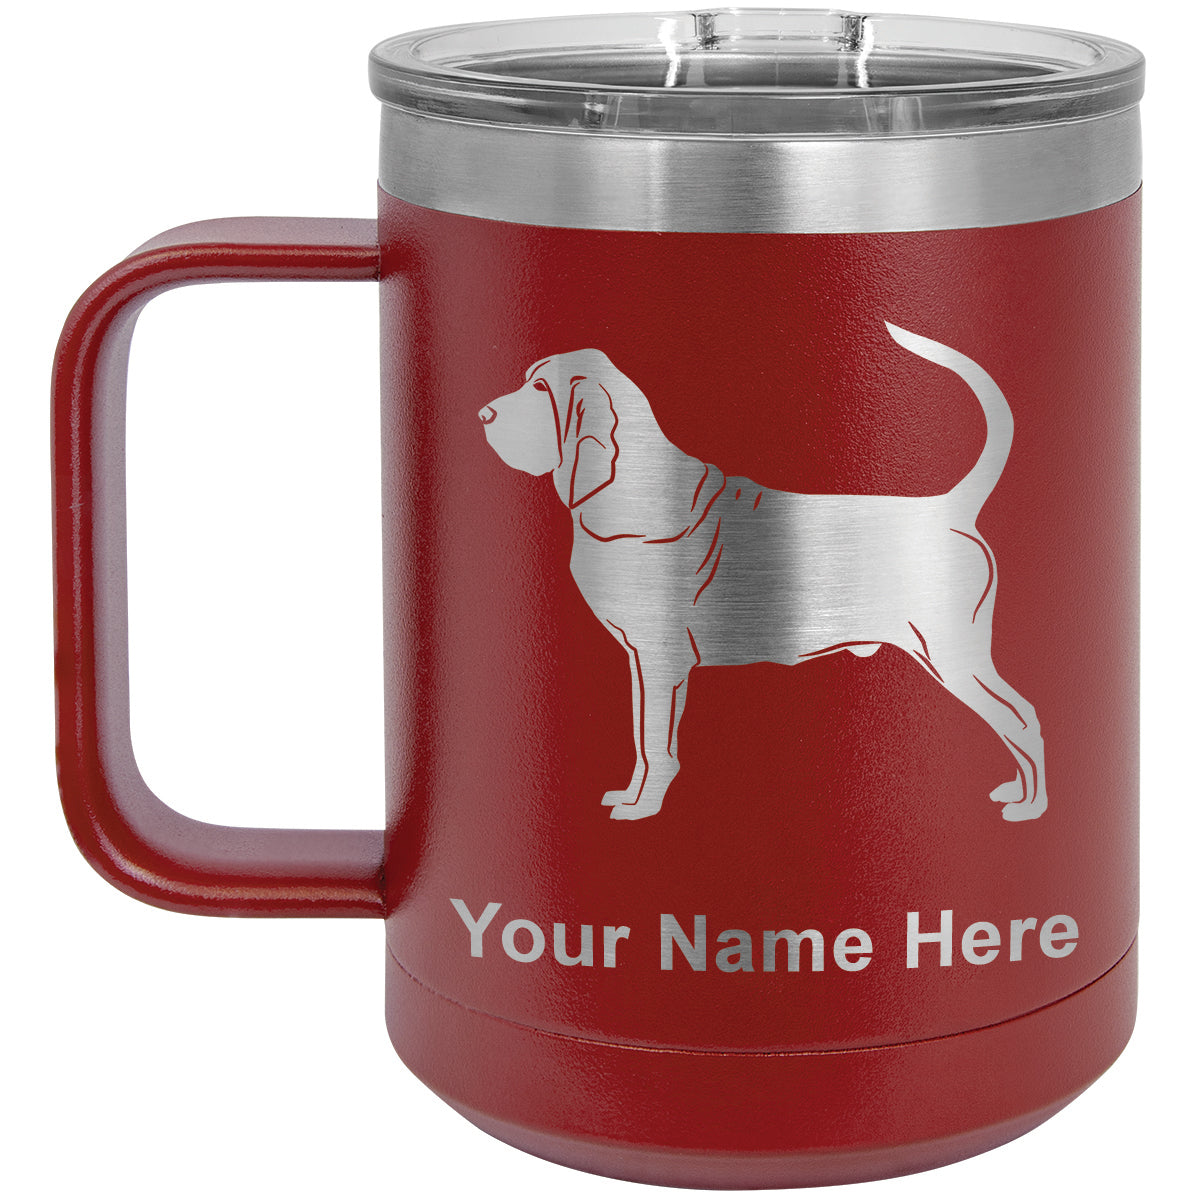 15oz Vacuum Insulated Coffee Mug, Bloodhound Dog, Personalized Engraving Included